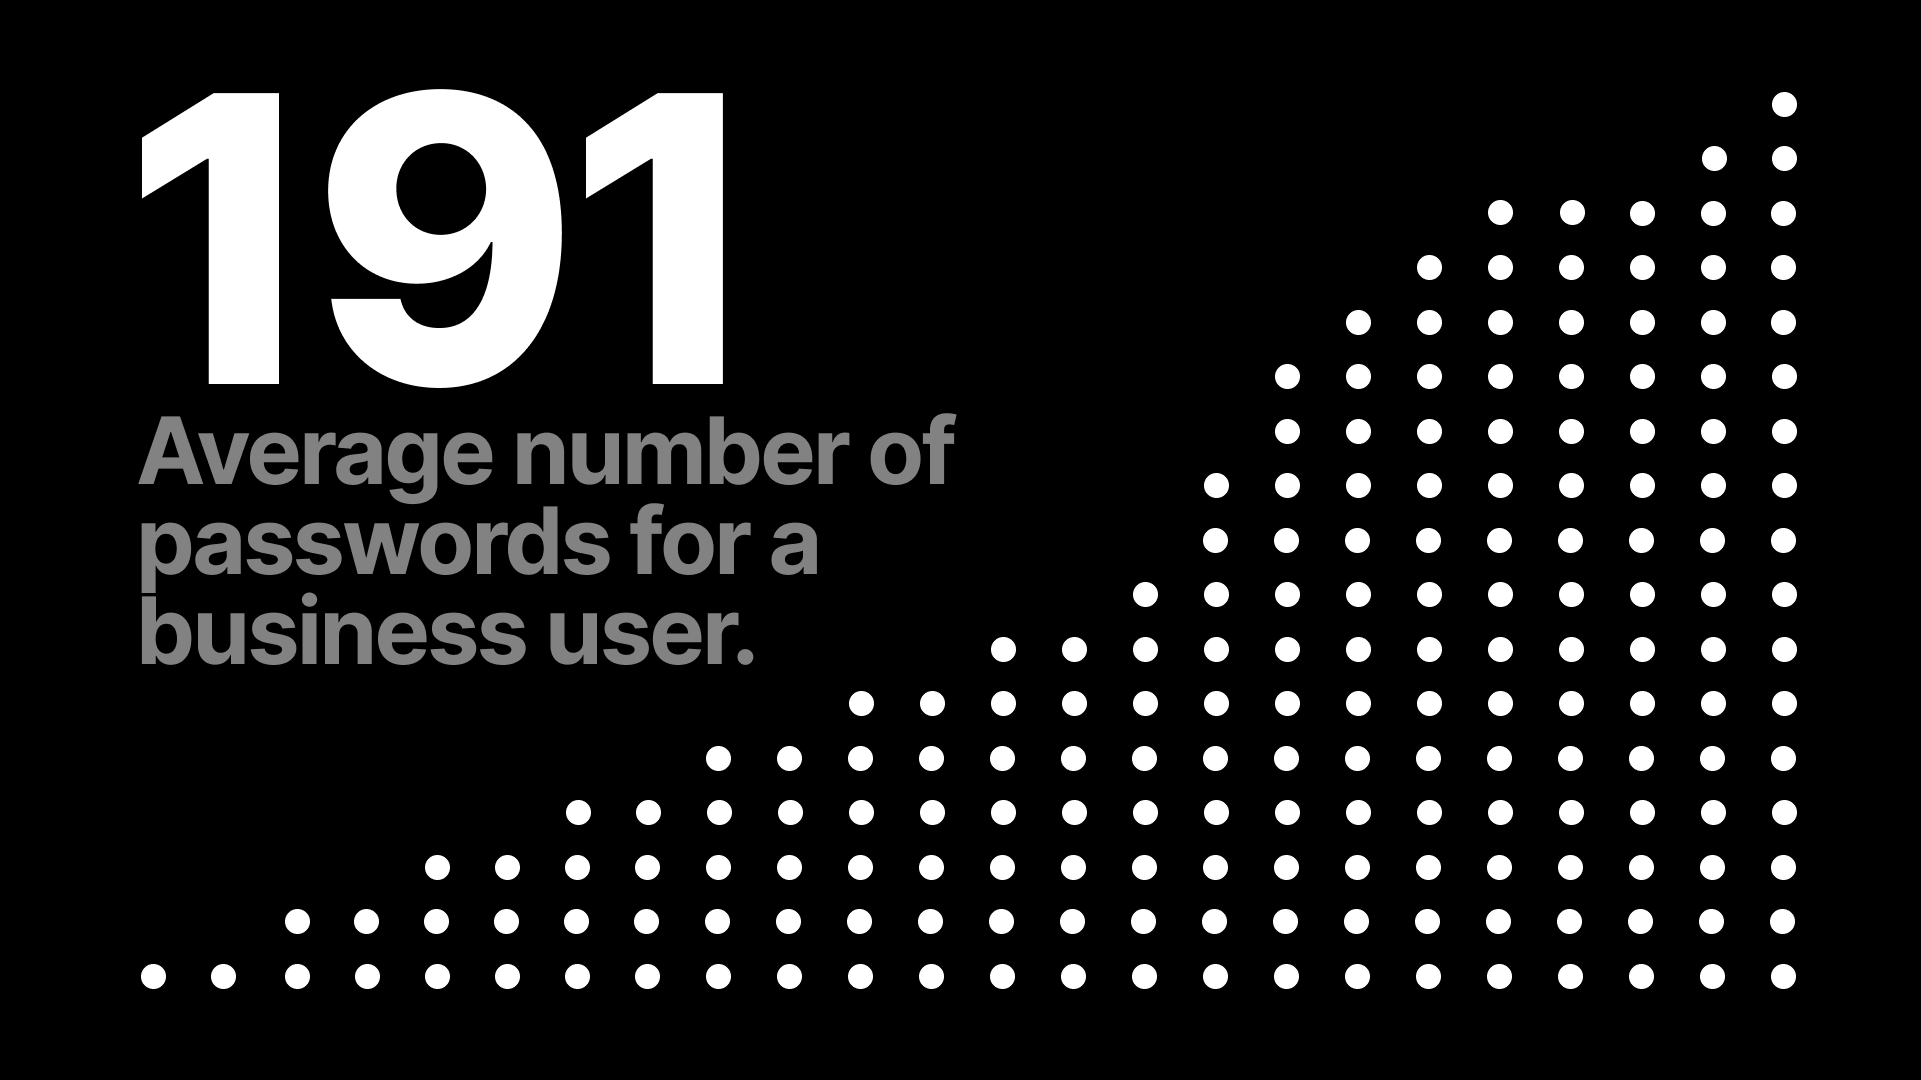 An average business user has 191 passwords.